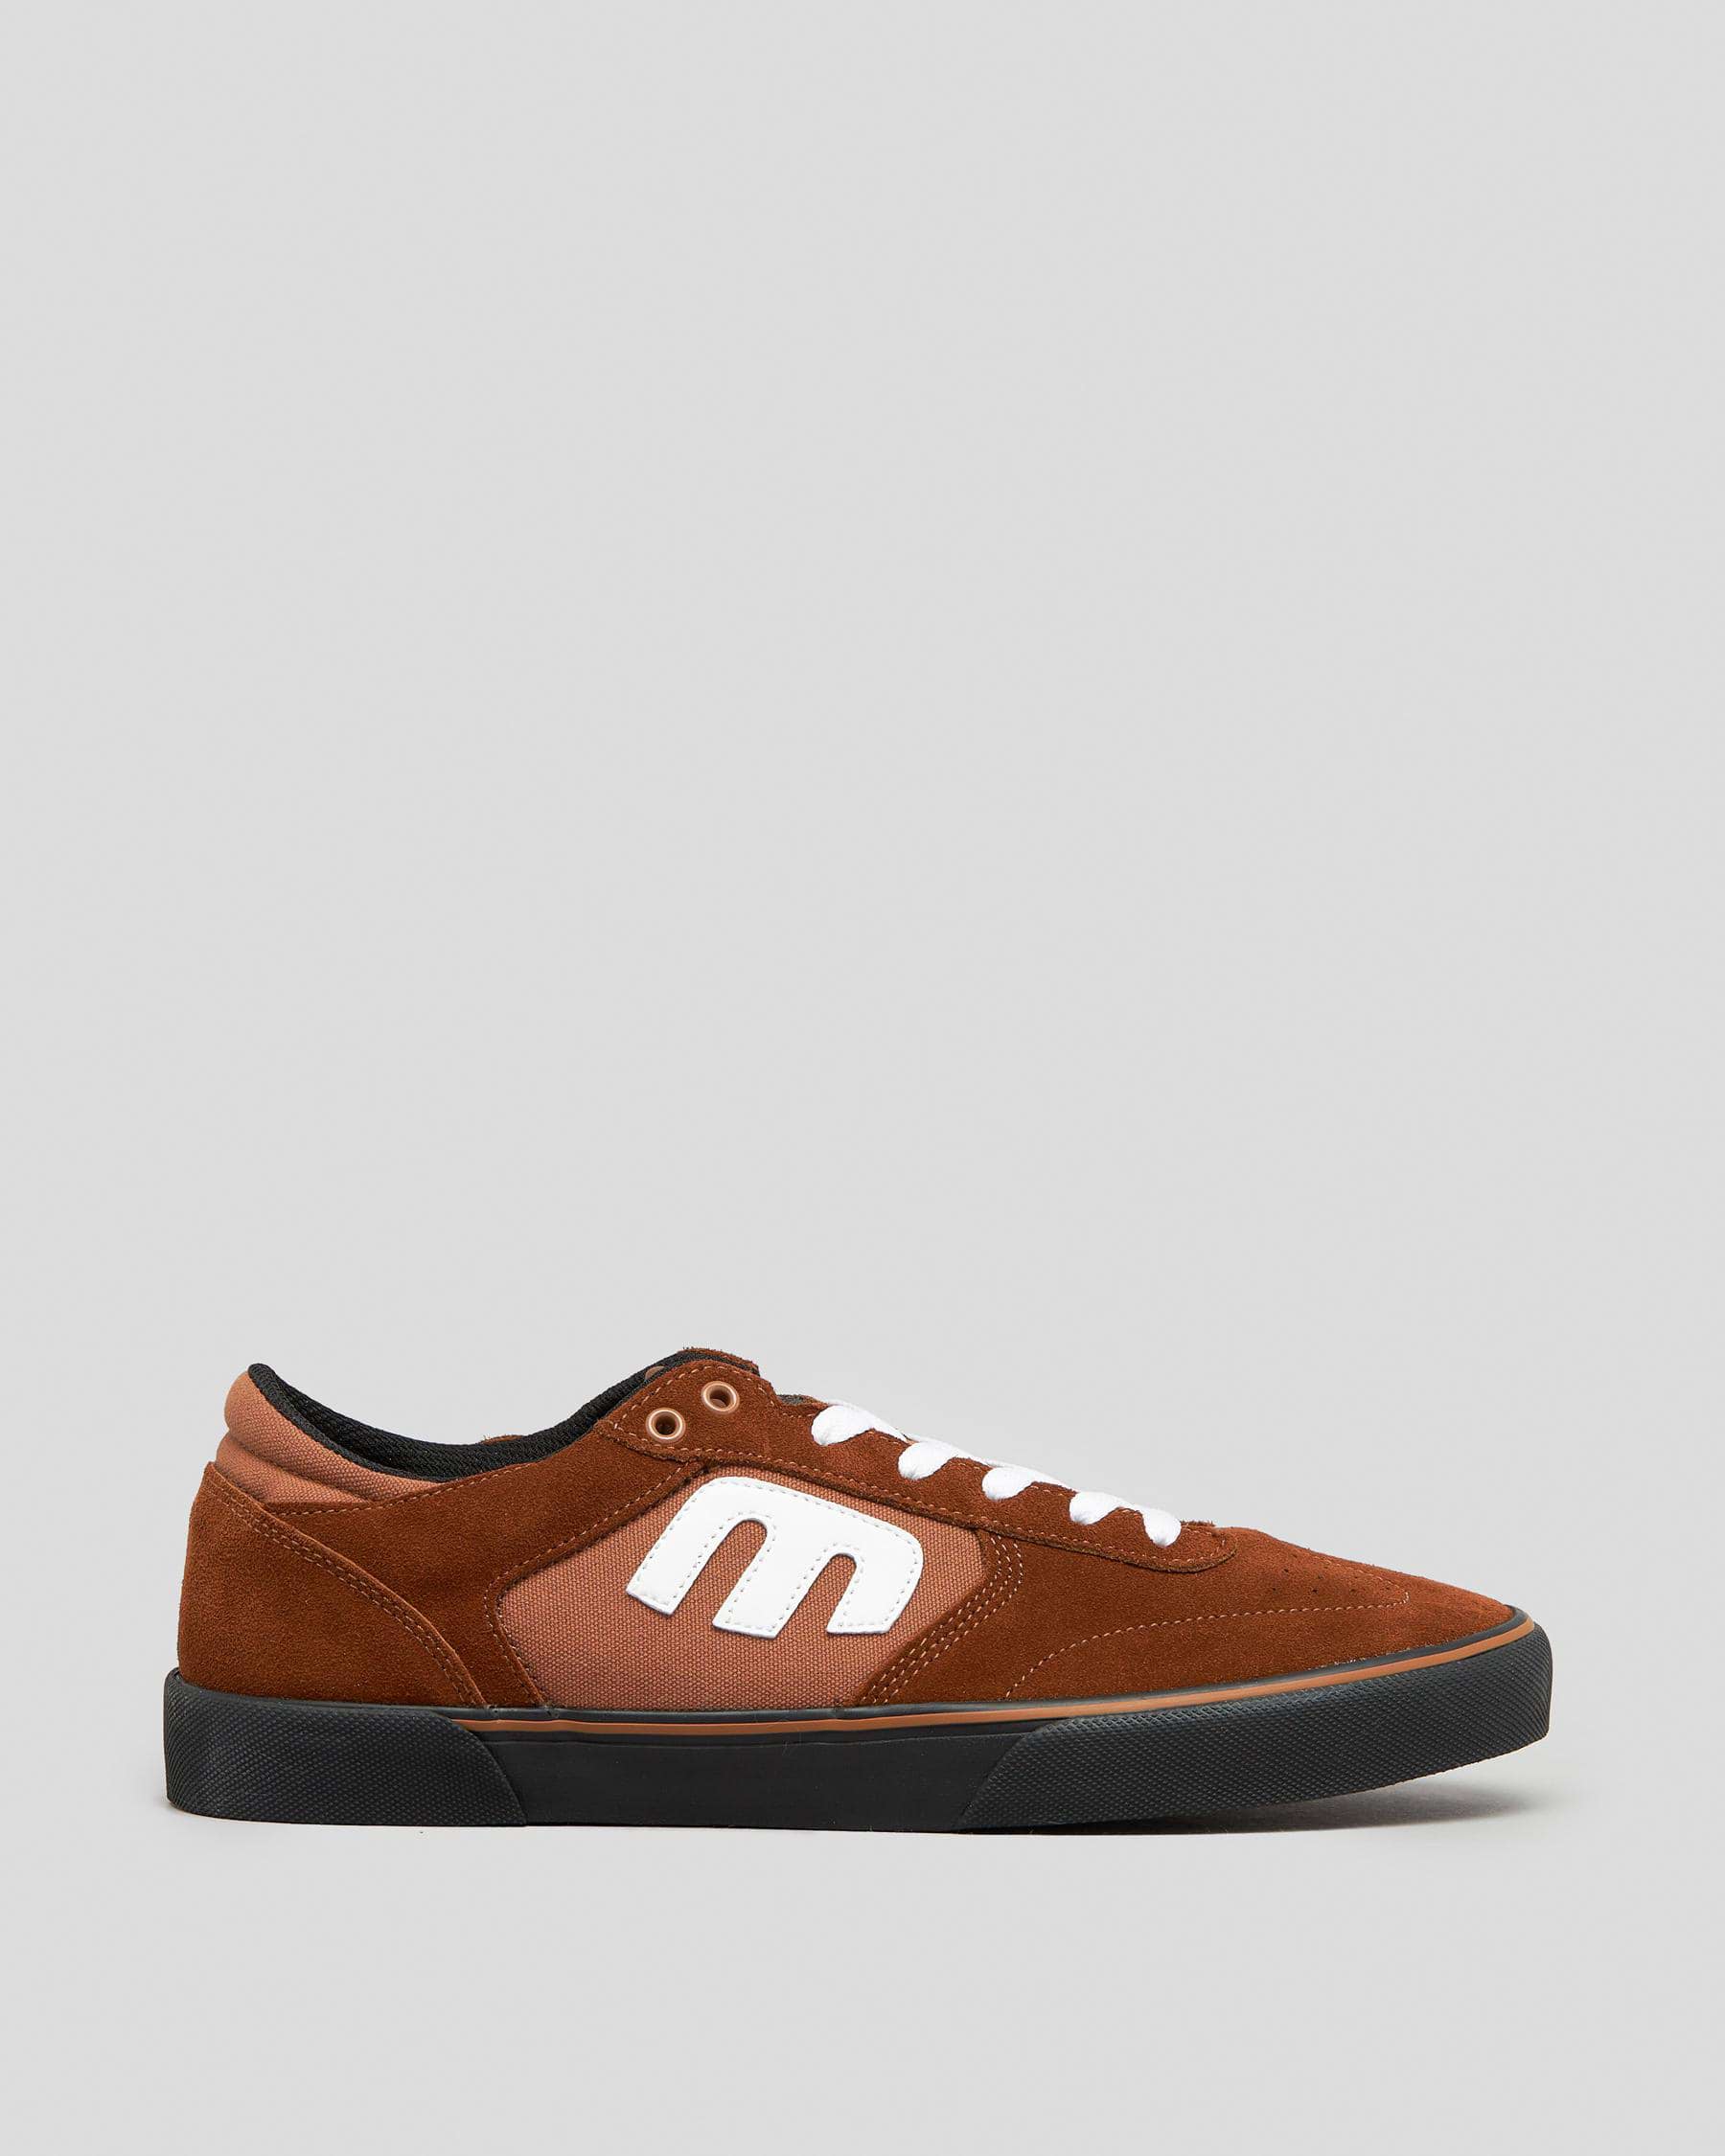 Shop Etnies Windrow Vulc Shoes In Brown/black/white - Fast Shipping ...